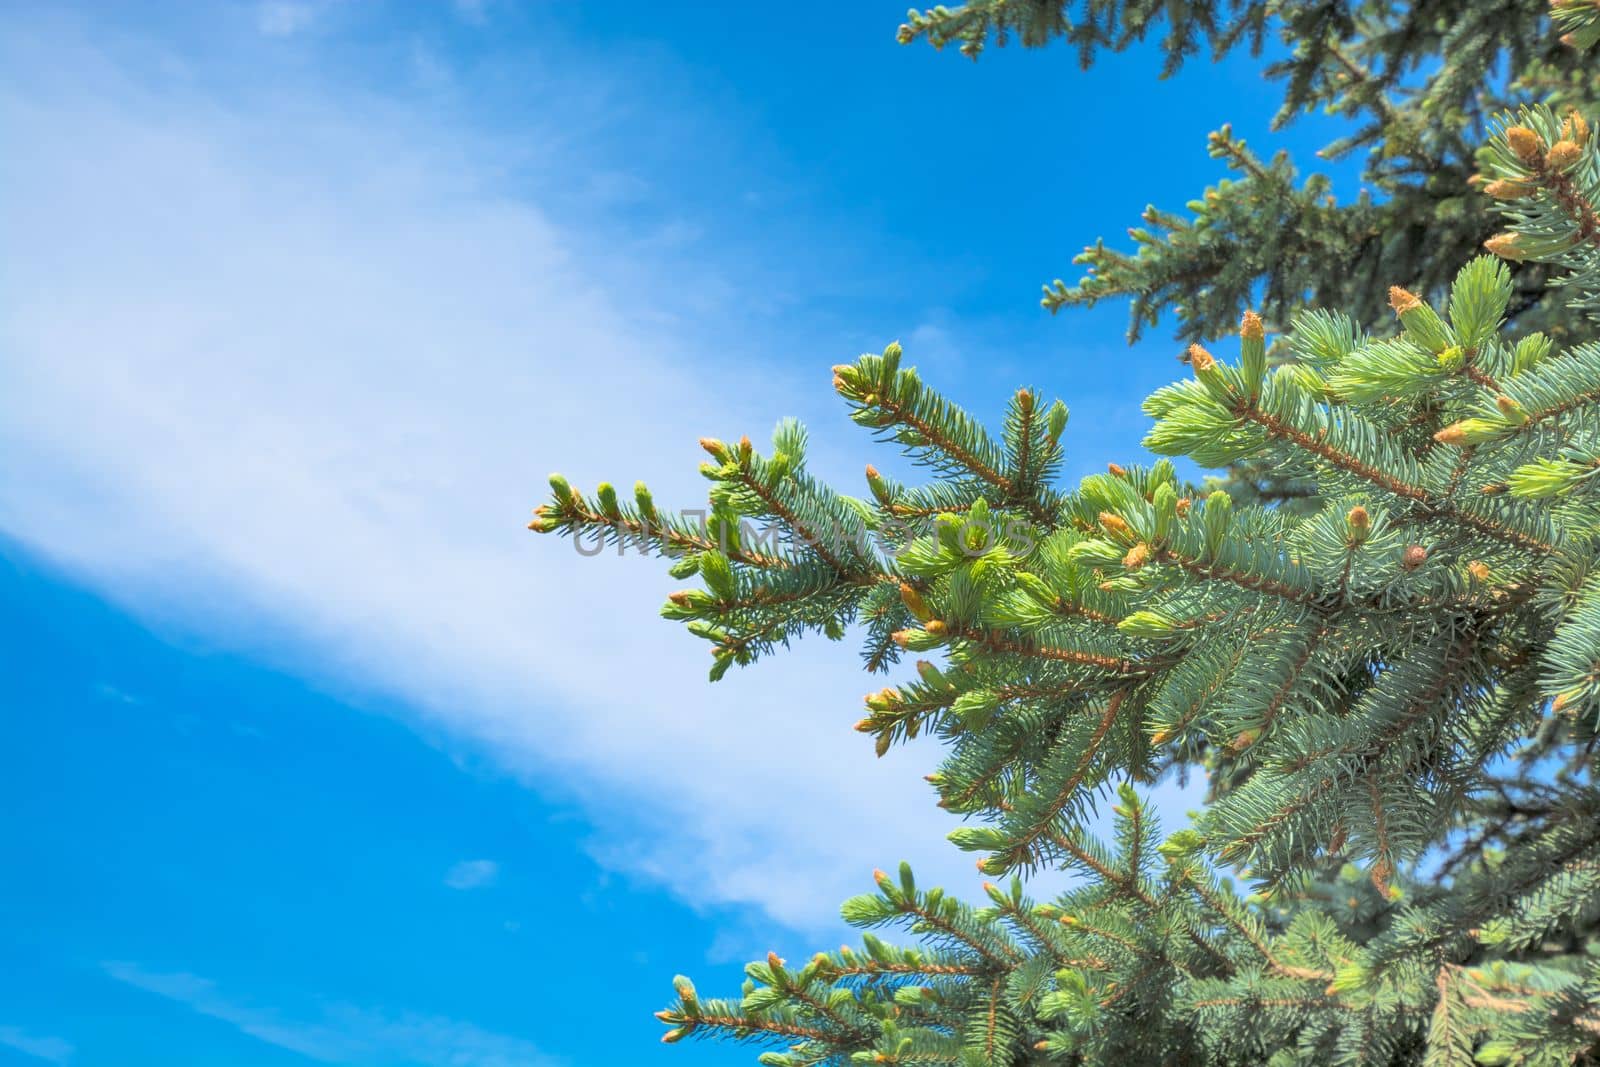 Blossoming pinetree branches on blue sky background by Imagenet